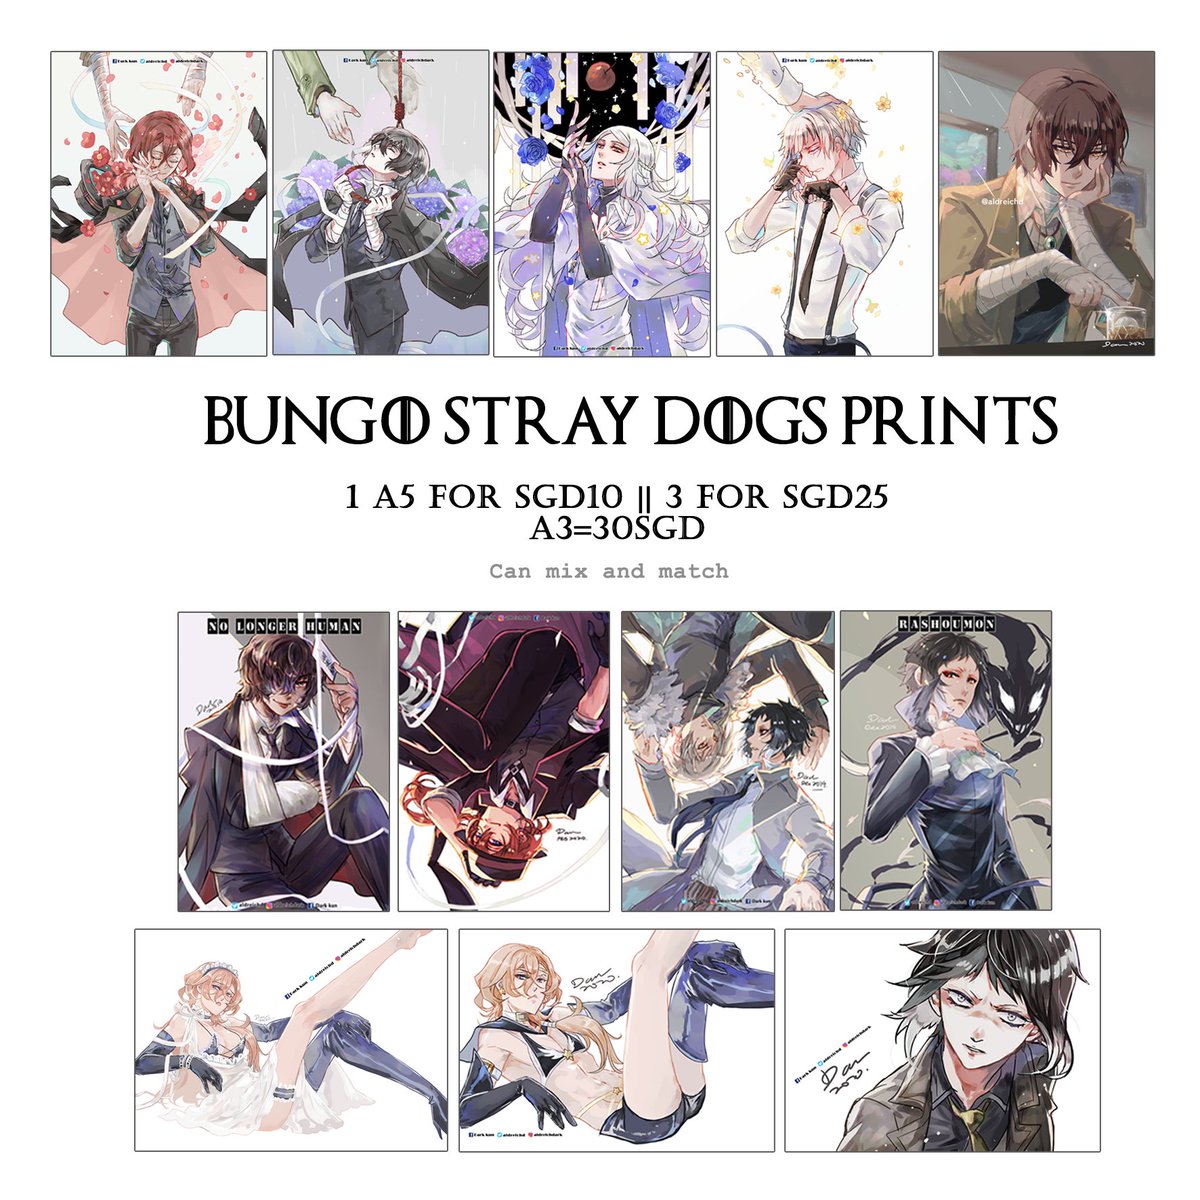 AFASG catalogue part 7

Looks like this fandom is here to stay rent free in my head too *looks at the increasing fanarts

#AFASG2022 #AFASG #Bungoustraydogs #bungostraydogs #bsd 